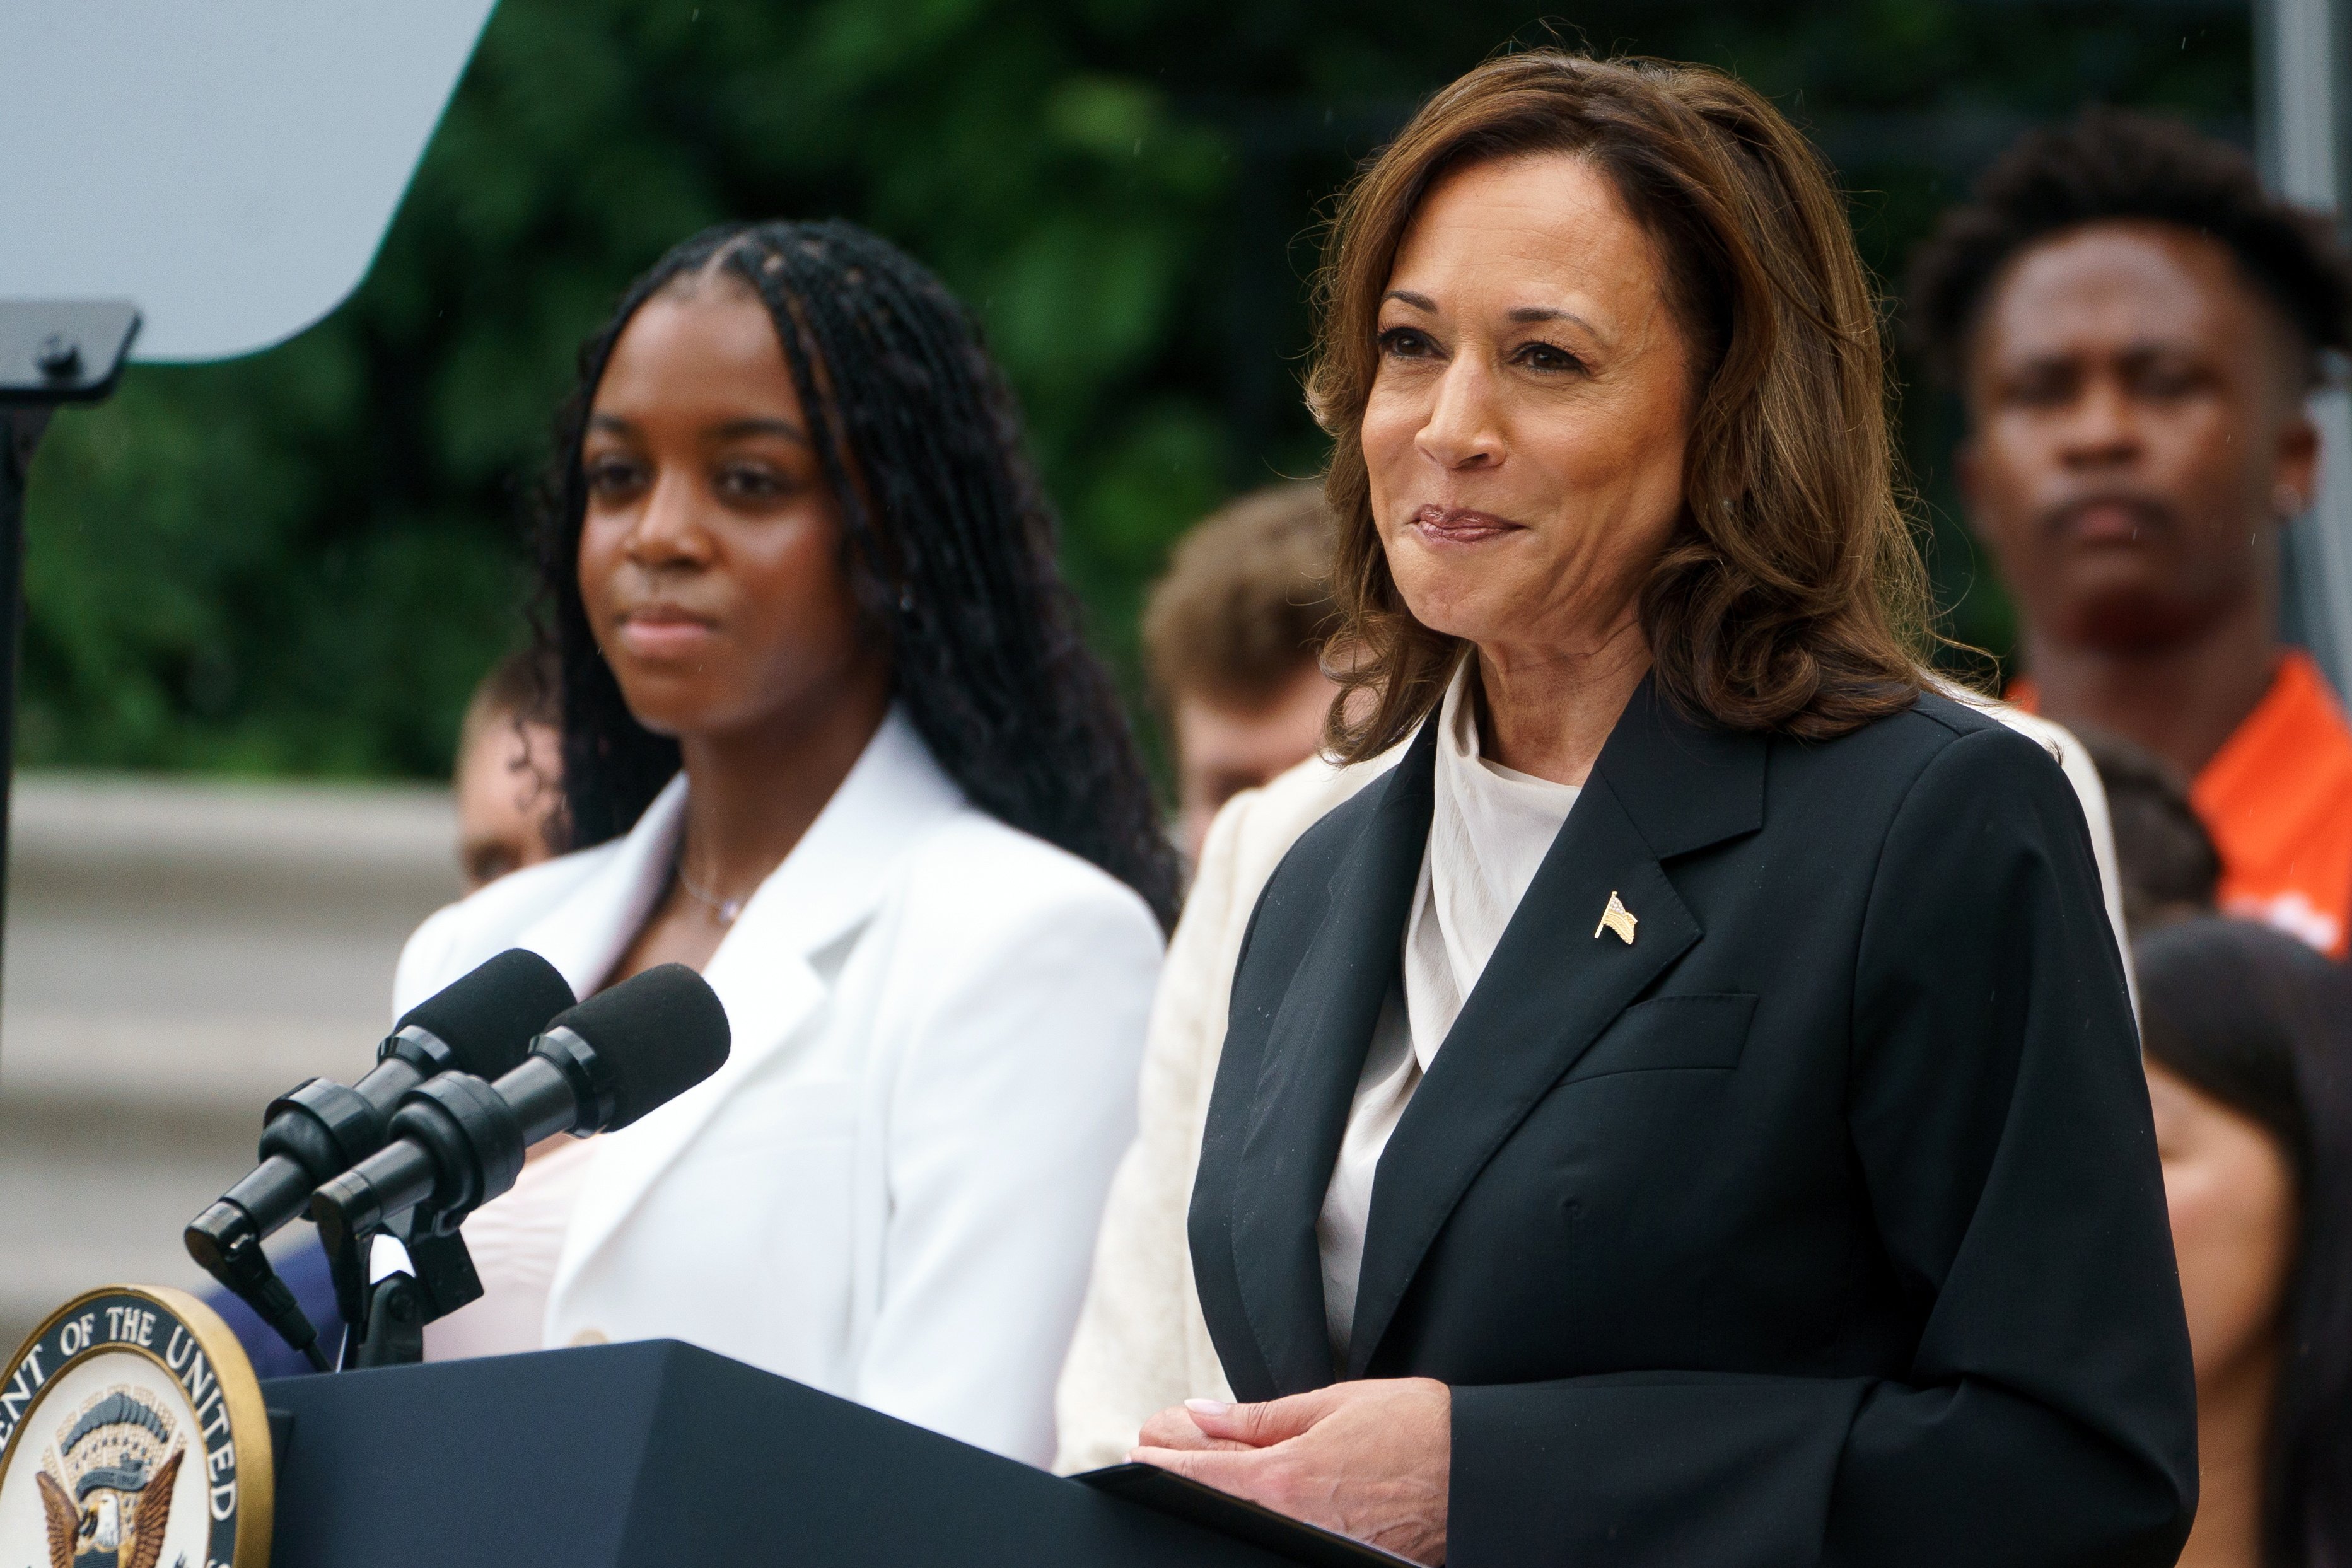 US Vice-President Kamala Harris at an event  at the White House on Monday, her first public appearance since Joe Biden withdrew from the presidential race and endorsed her to replace him as Democratic nominee. Photo: EPA-EFE 